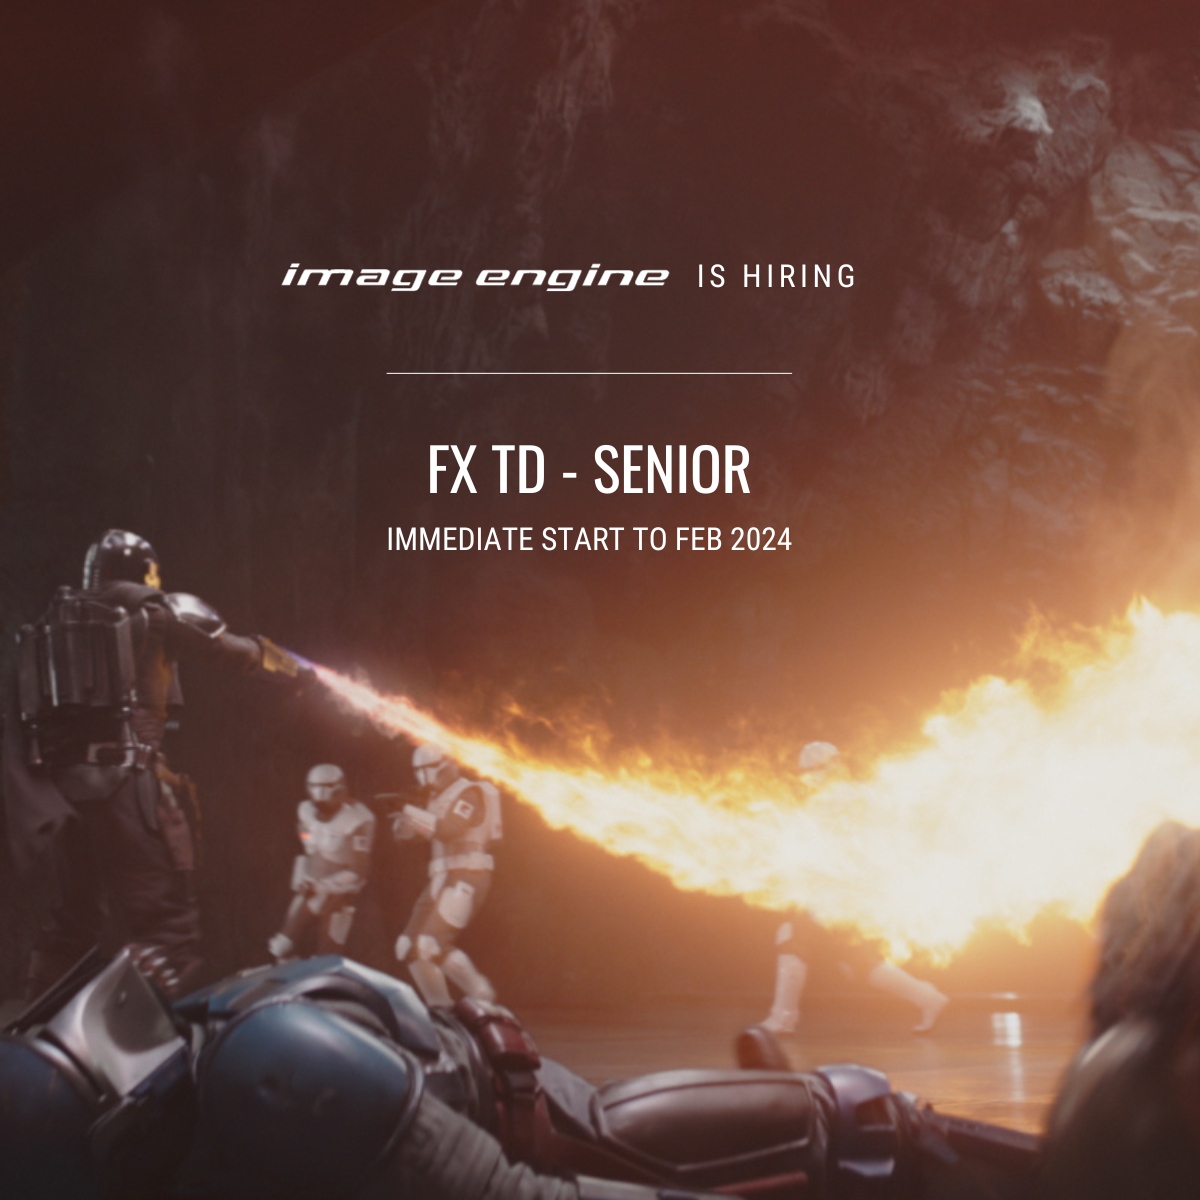 H I R I N G - We’re looking for Senior FX TDs to start as soon as possible until the beginning of February. Apply now and join Image Engine! imageengine.bamboohr.com/careers/50

#VFXjobs #VFXcareers #VFXrecruitment #JoinOurTeam #JobSeekers #NowHiring #VancouverJobs #YVRjobs